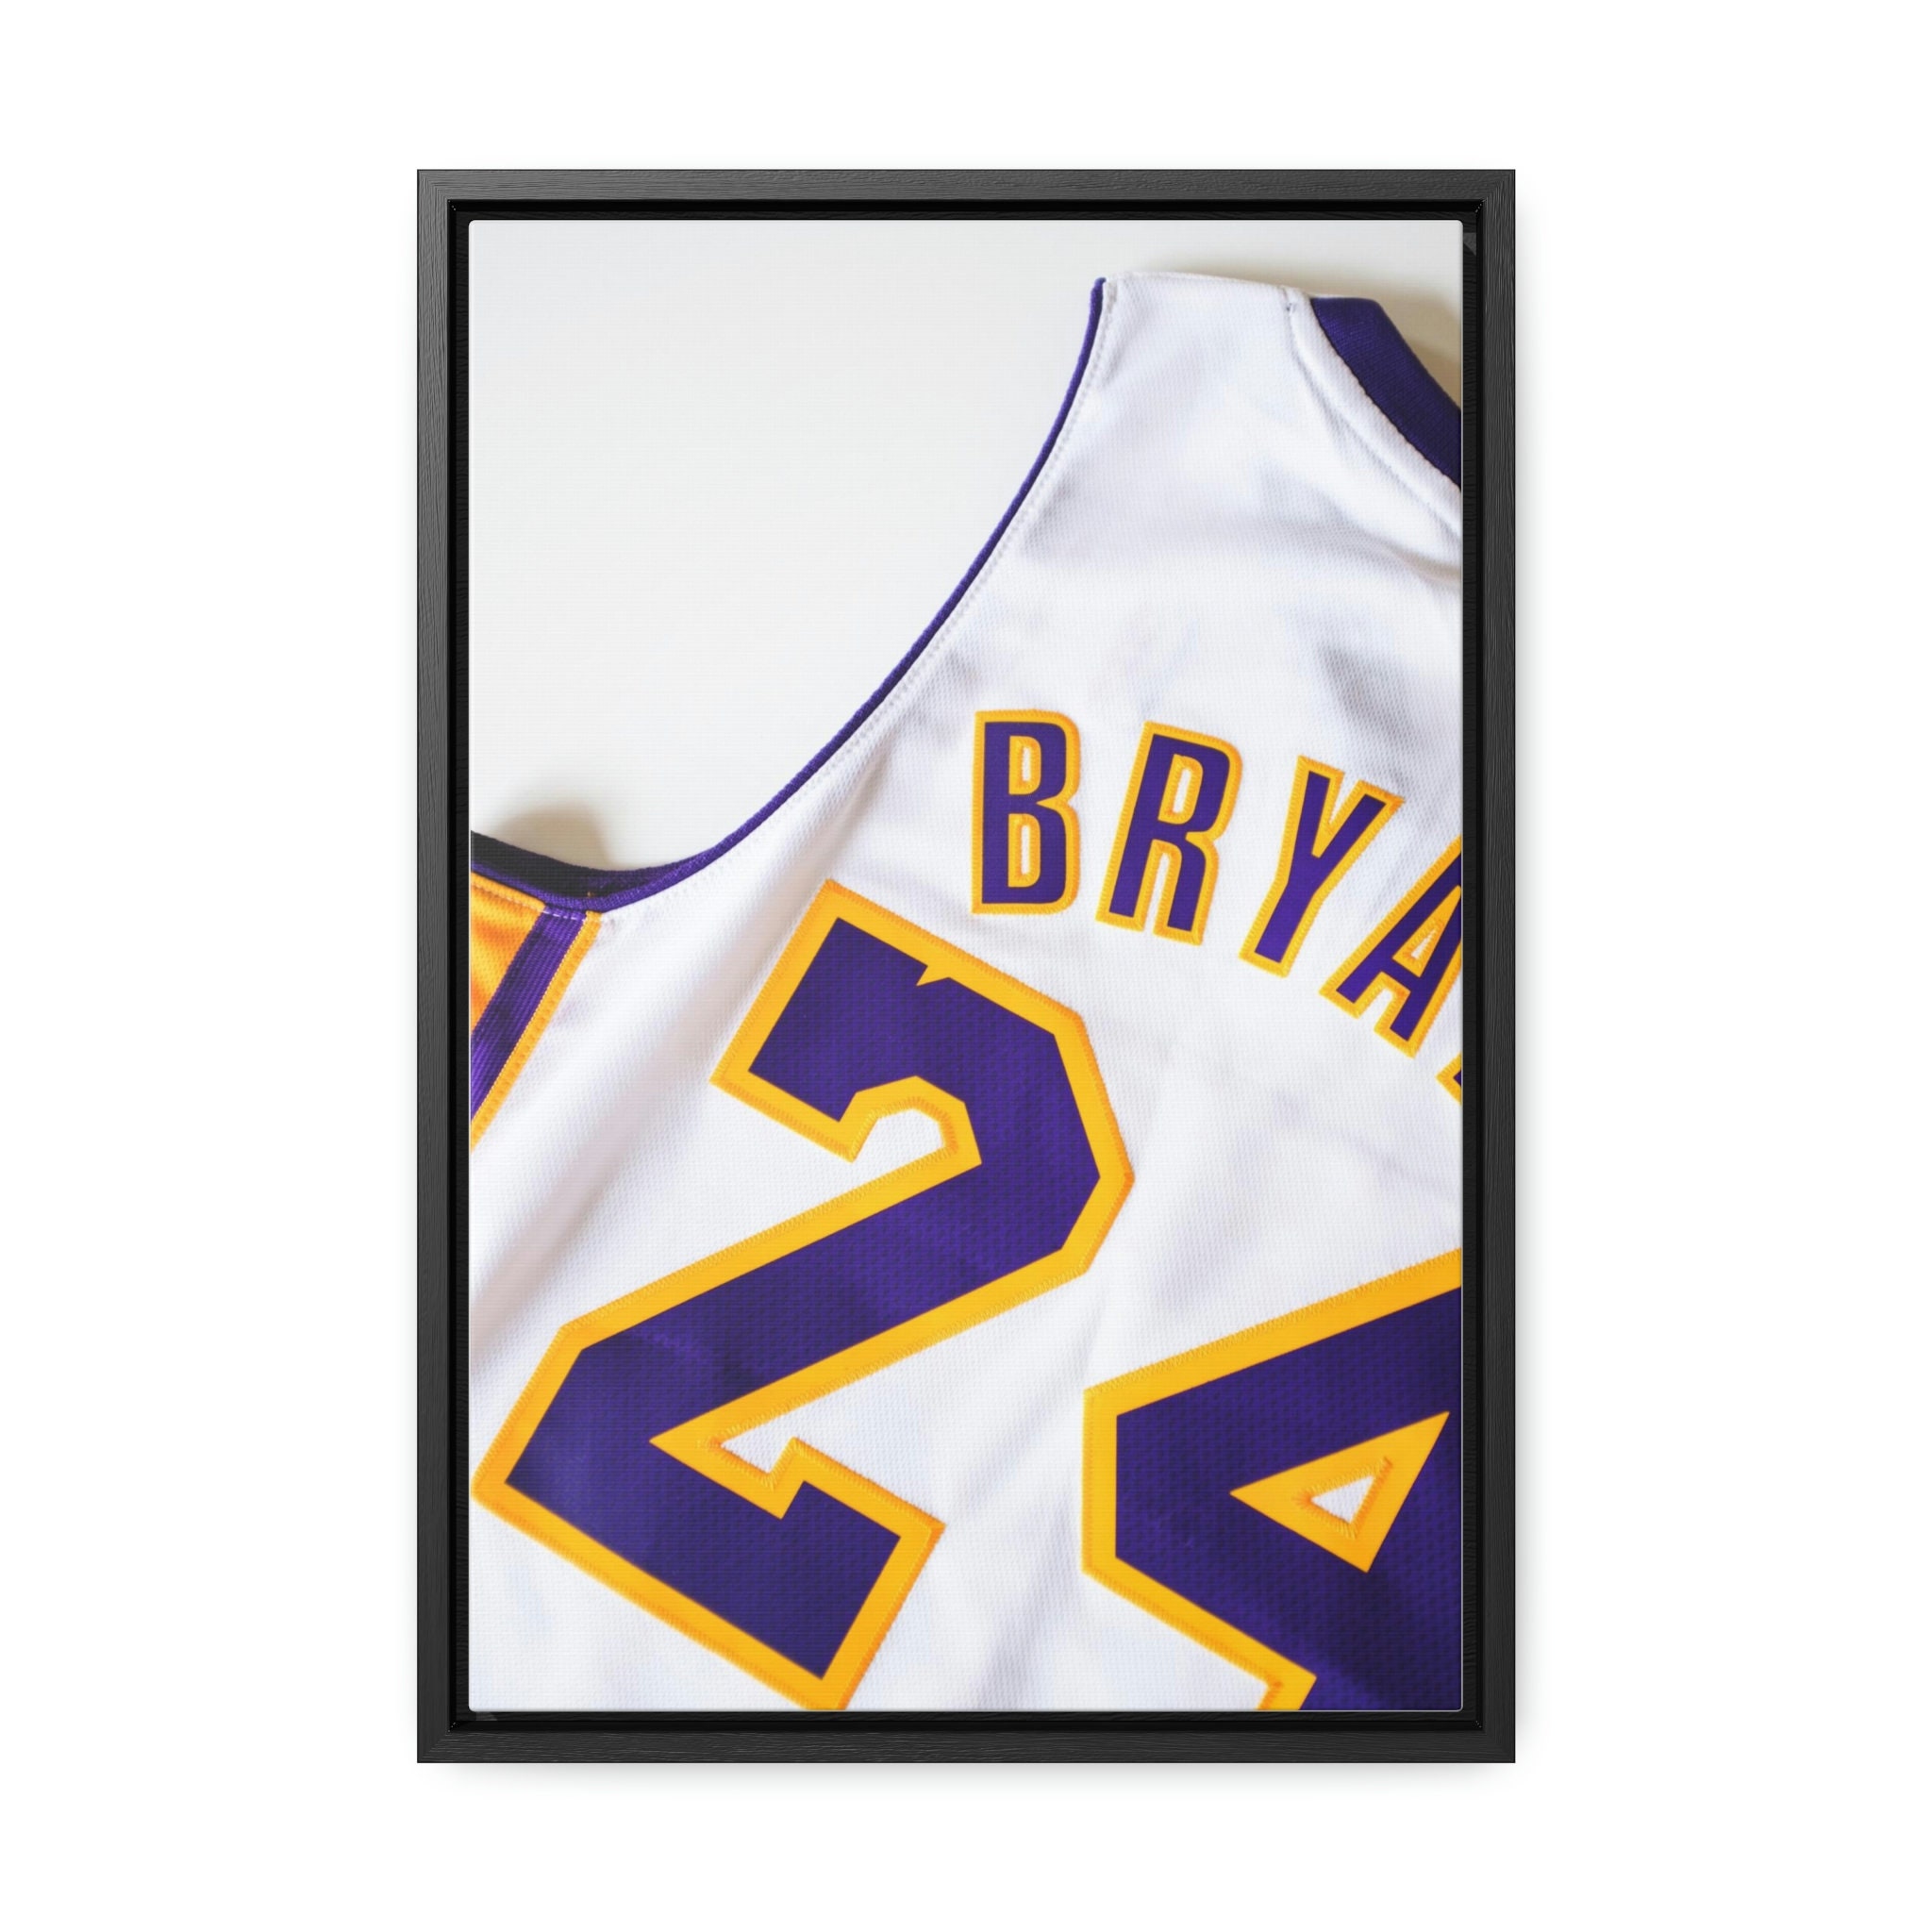 NEW JERSEY KOBE MAMBA 04 BASKETBALL JERSEY FREE CUSTOMIZE NAME AND NUMBER  ONLY full sublimation high quality fabrics/ basketball jersey